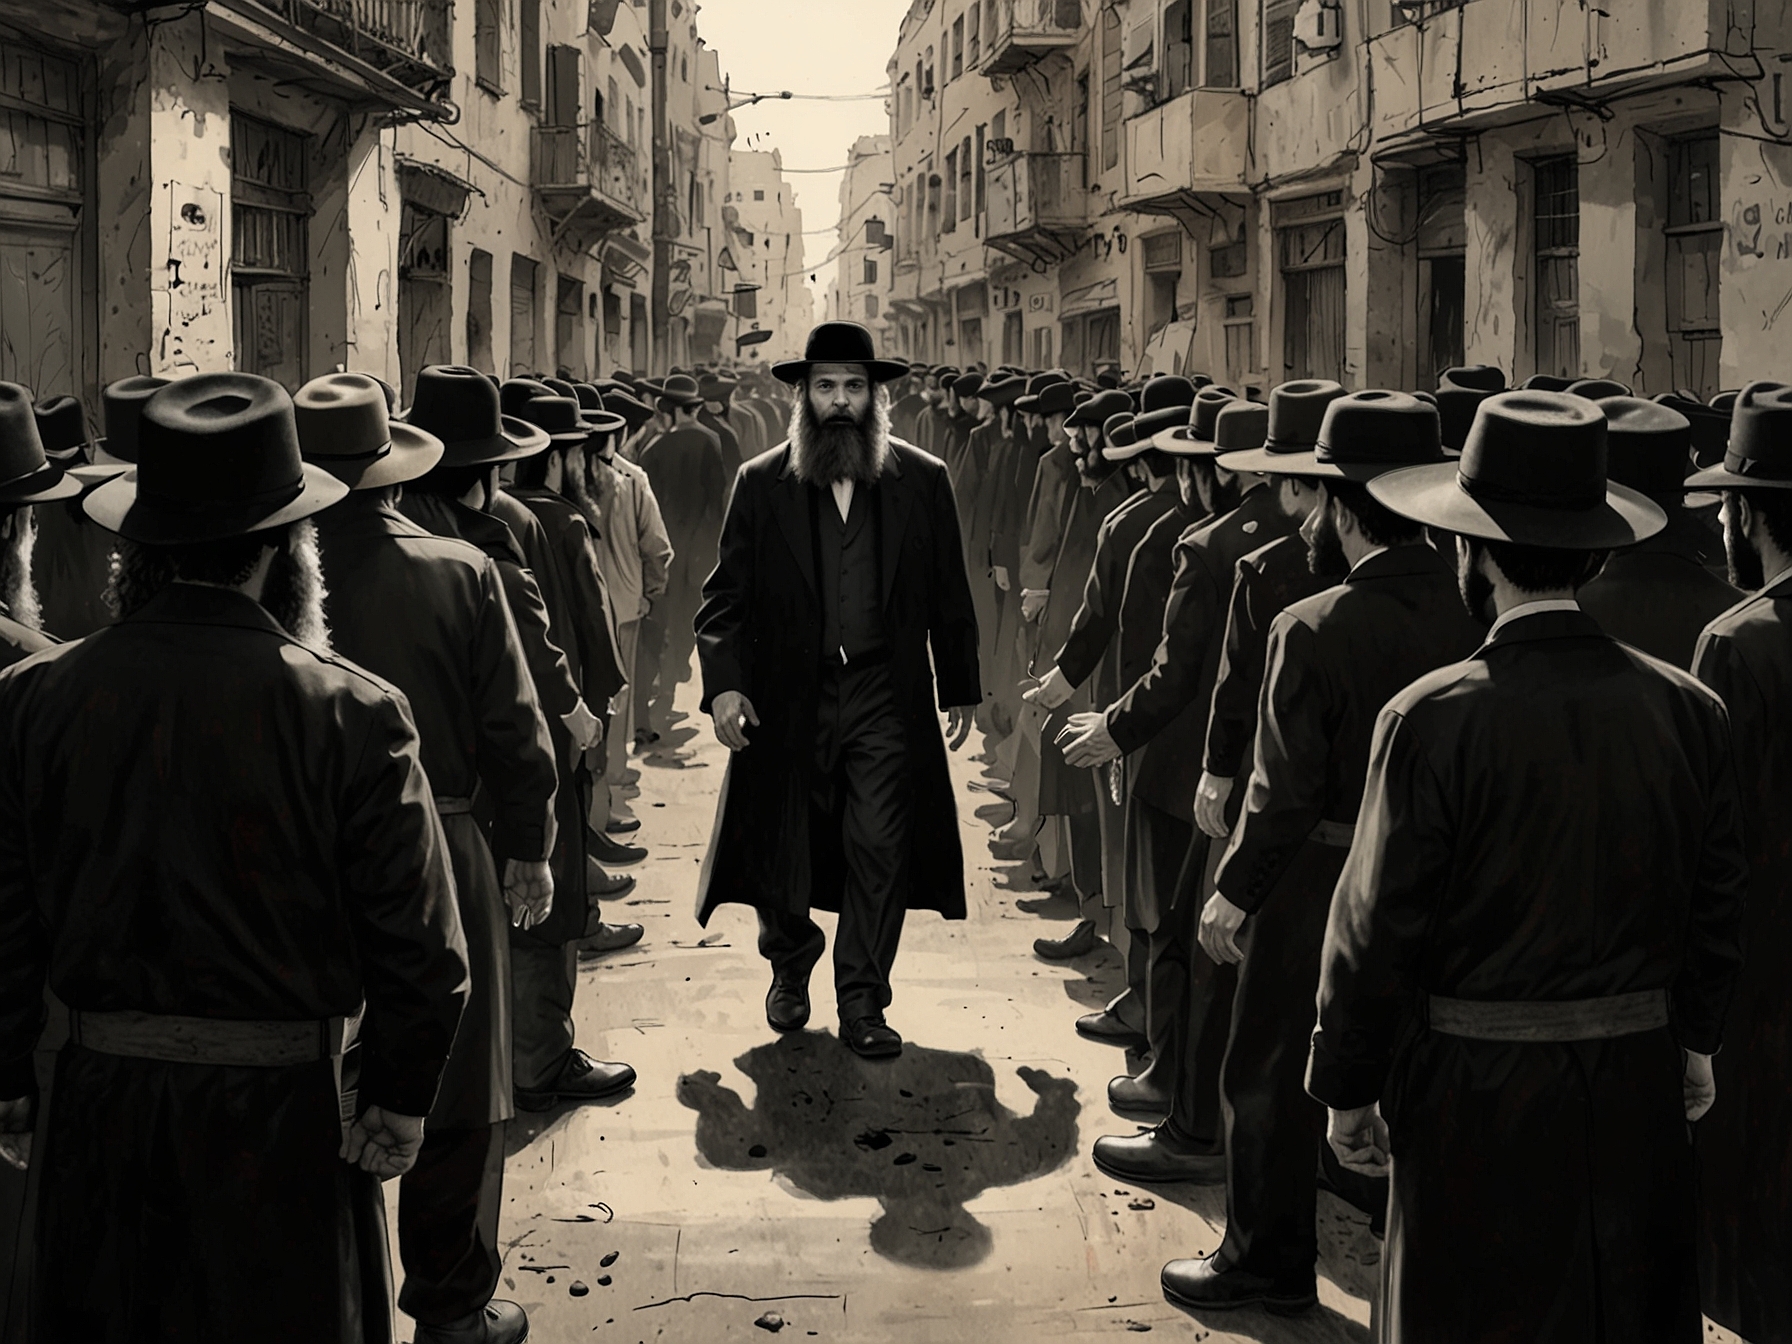 A scene from a protest featuring Haredi men demonstrating against conscription laws, highlighting the tension between religious freedom and national duty in Israeli society.